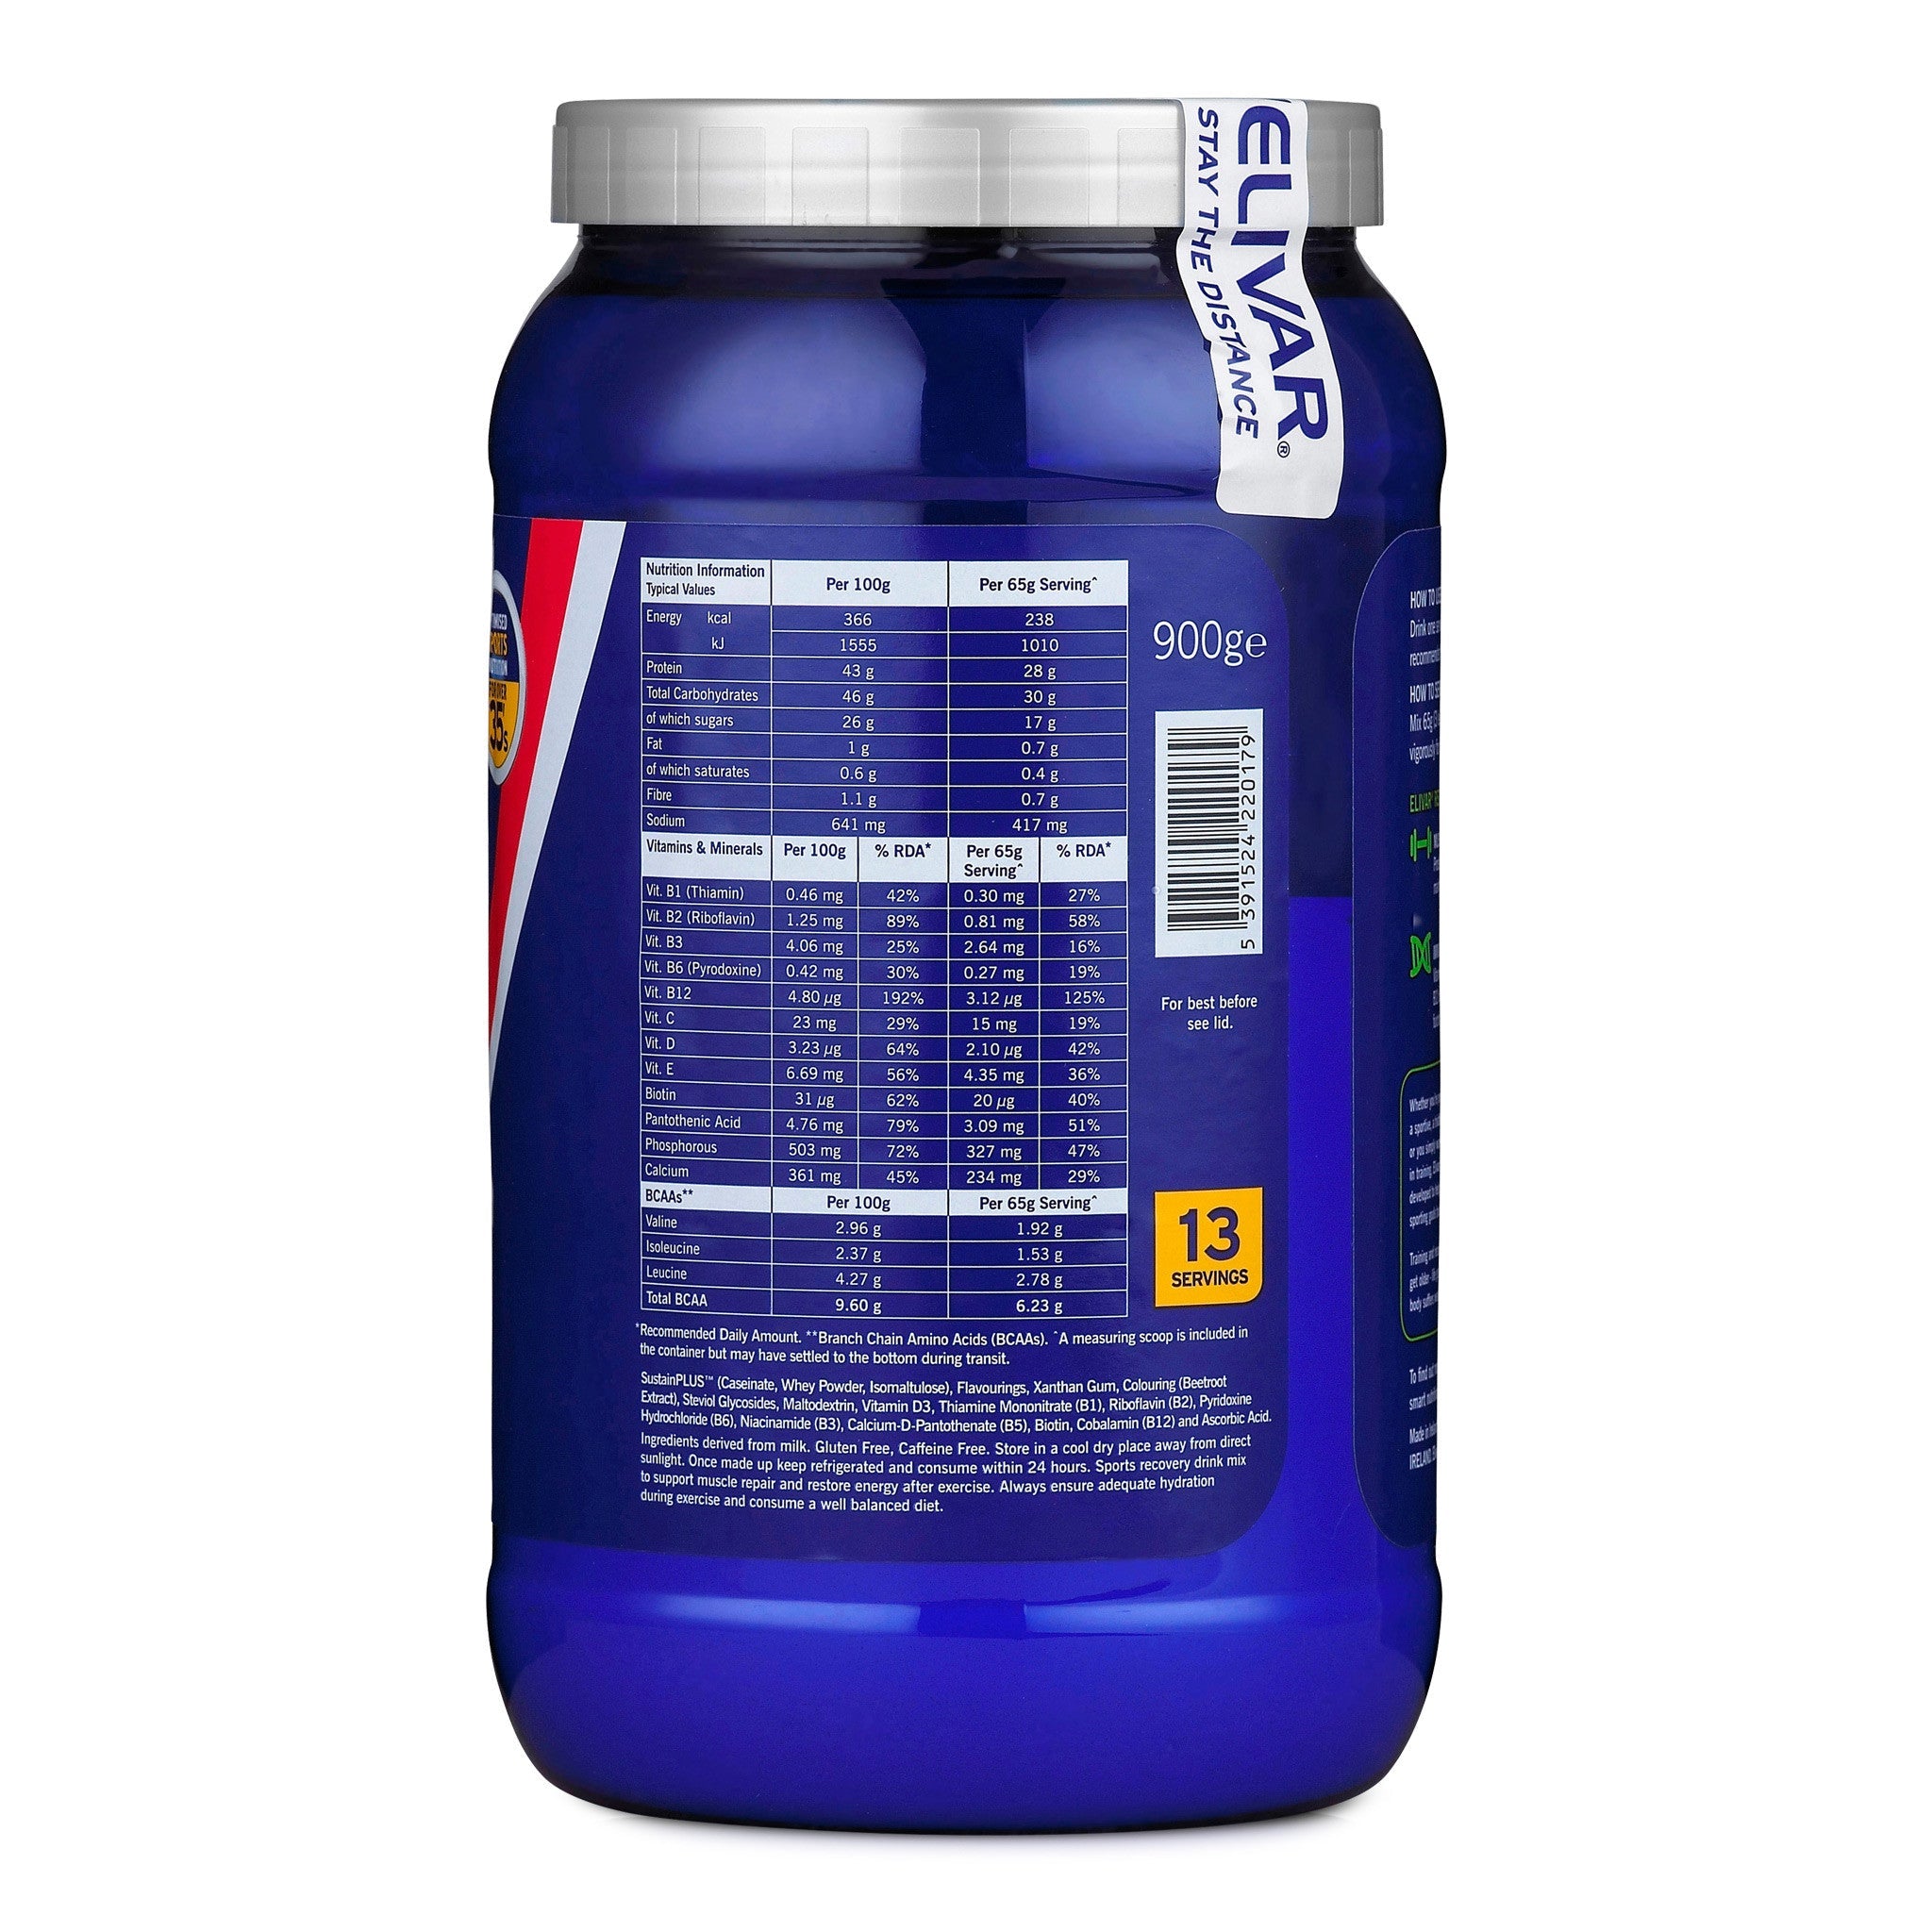 Recover - Post-training 1:1 Protein & Energy Recovery Drink